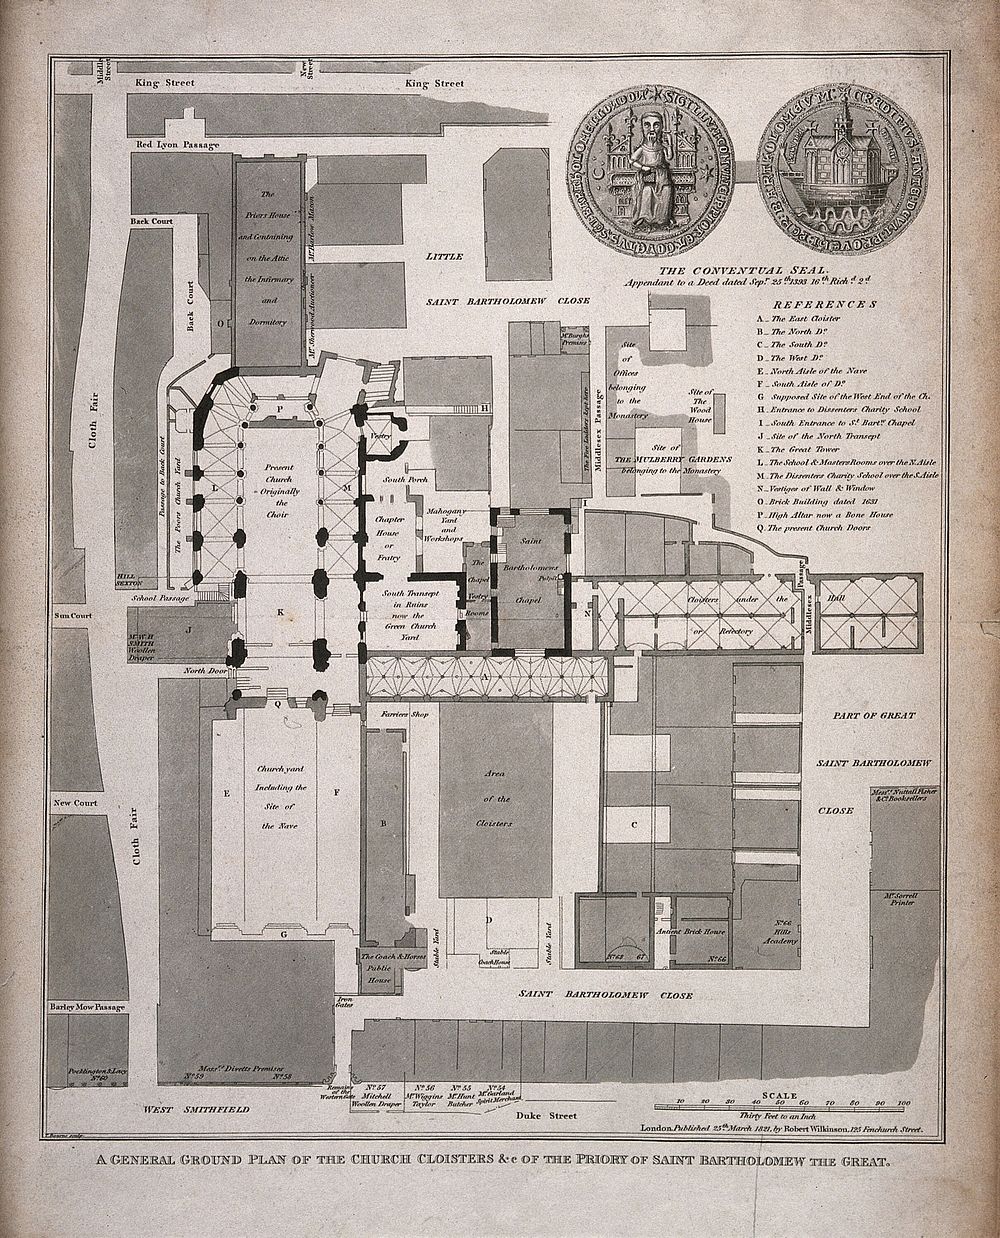 St Bartholomew's Priory, London: the ground plan, with a key, scale, and depiction of the conventual seals. Engraving by T.…